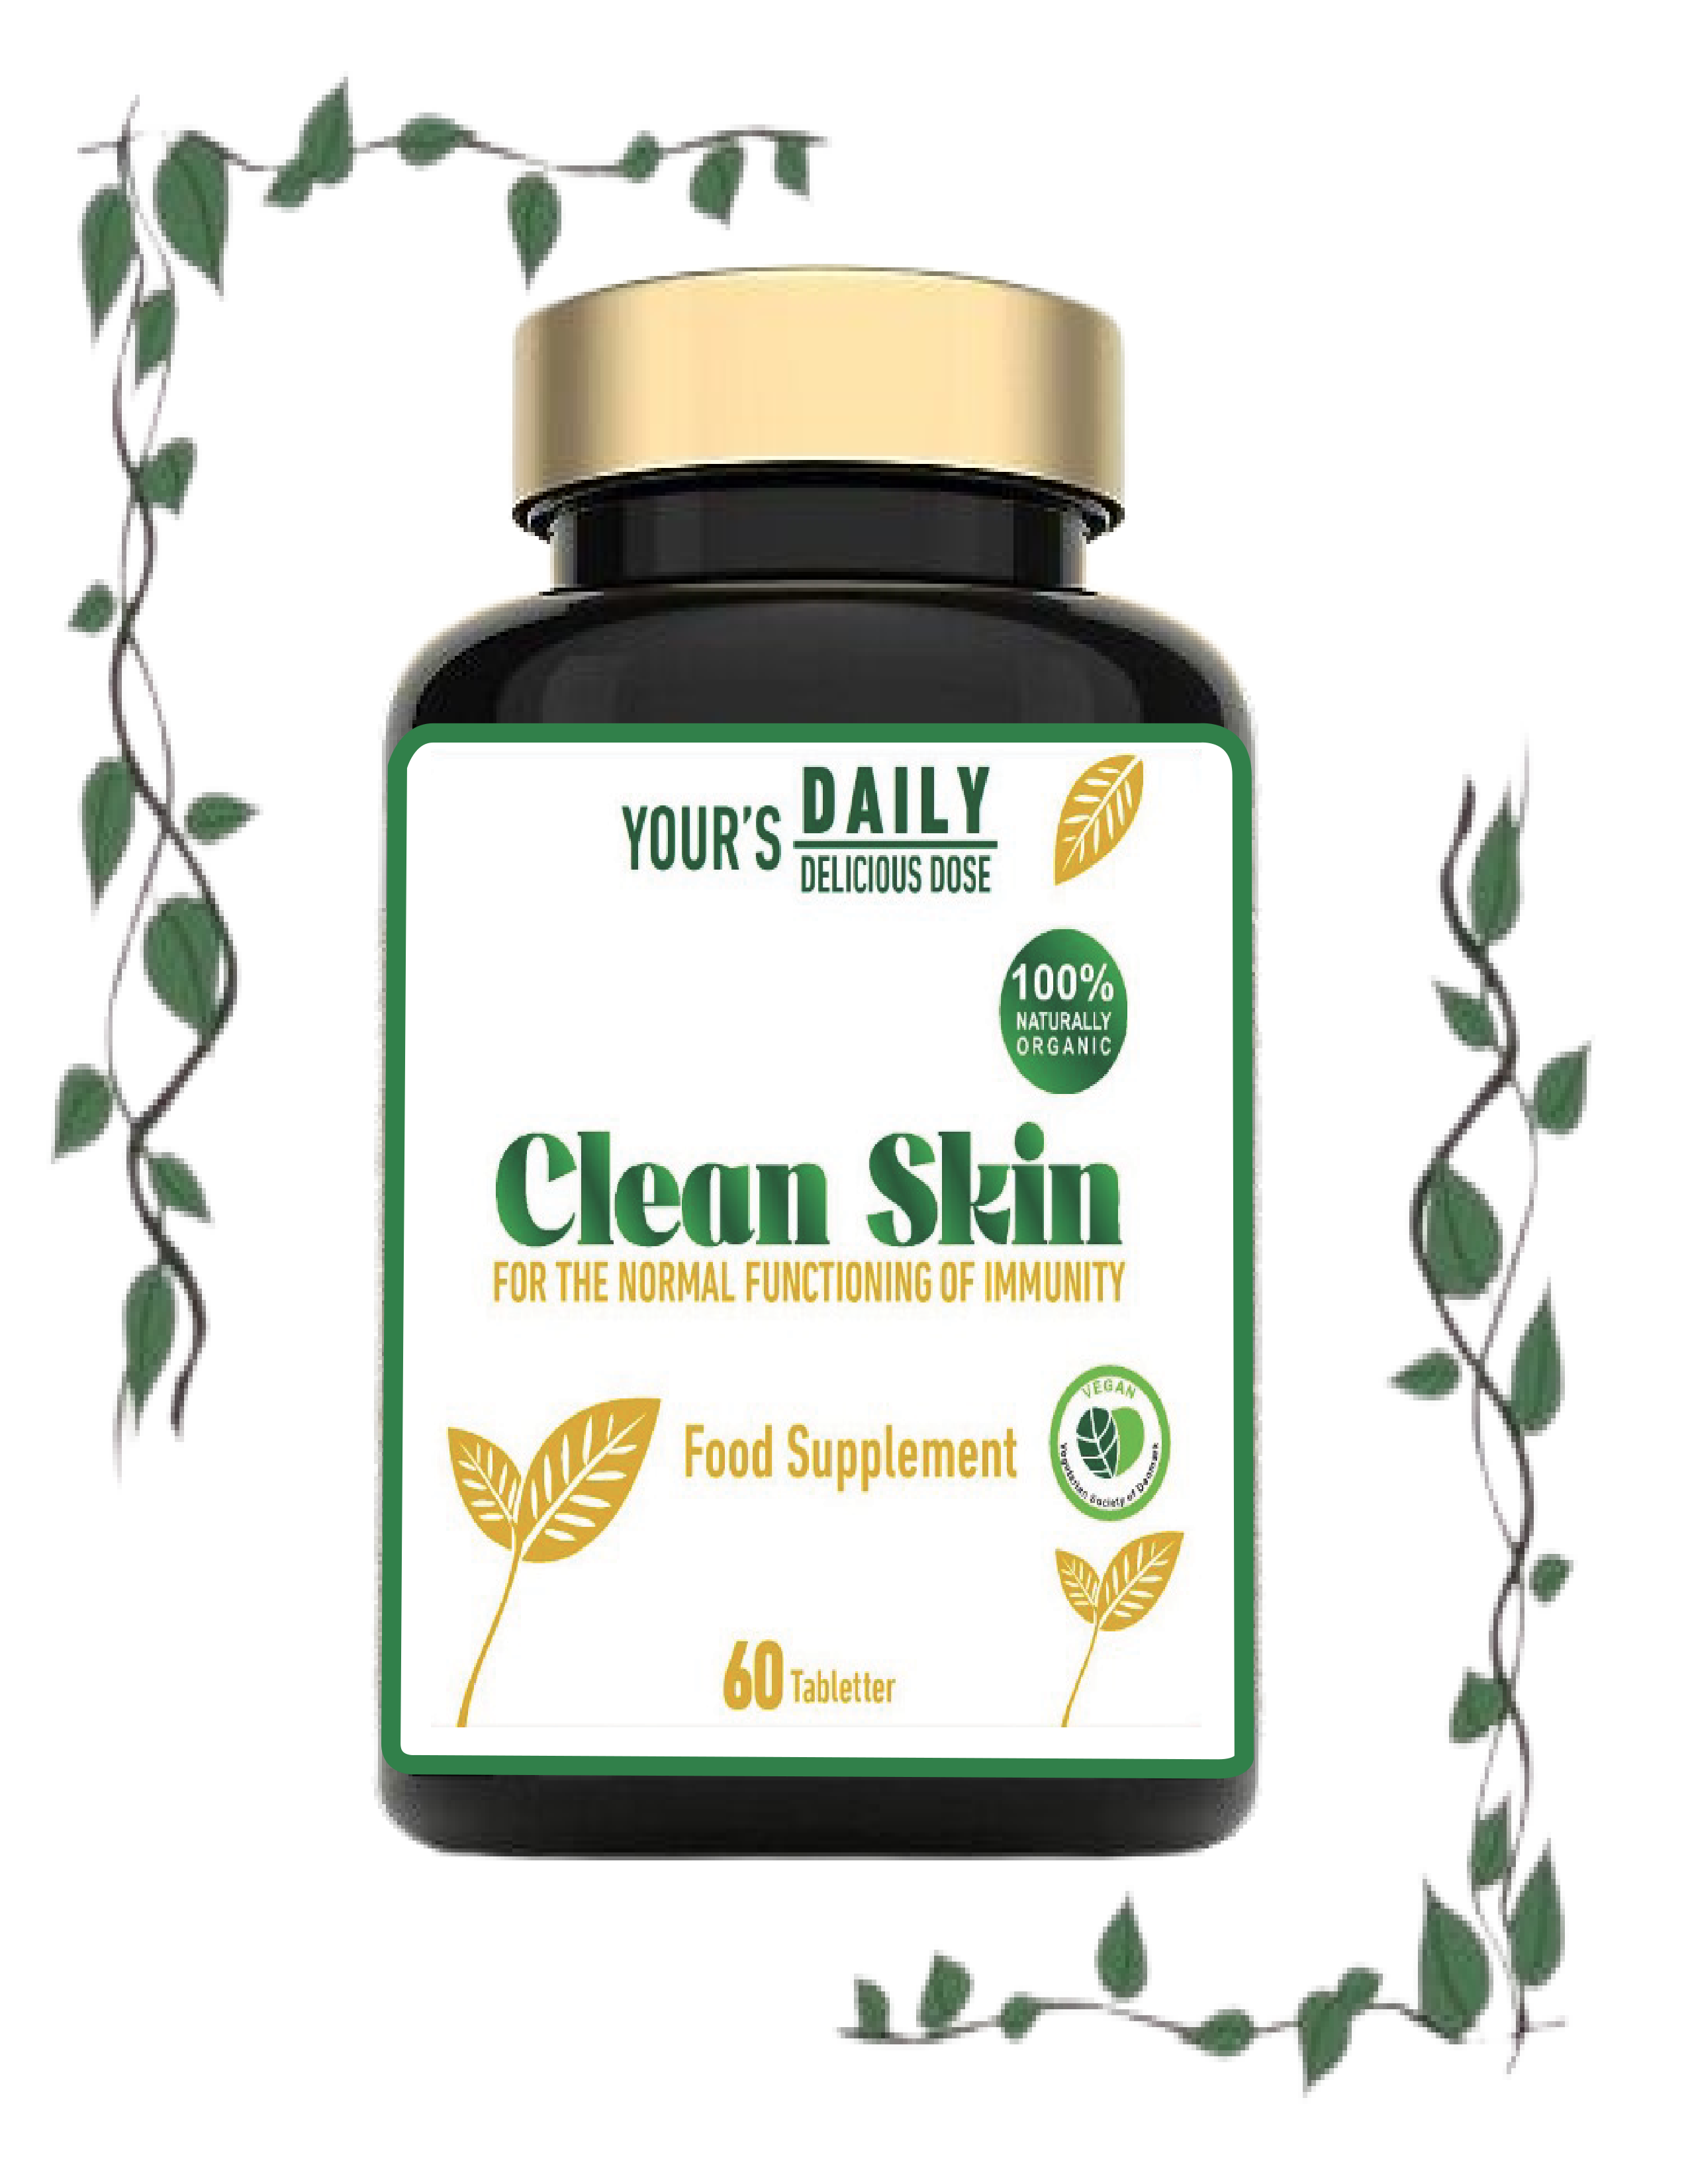 Clear Skin Supplement Image